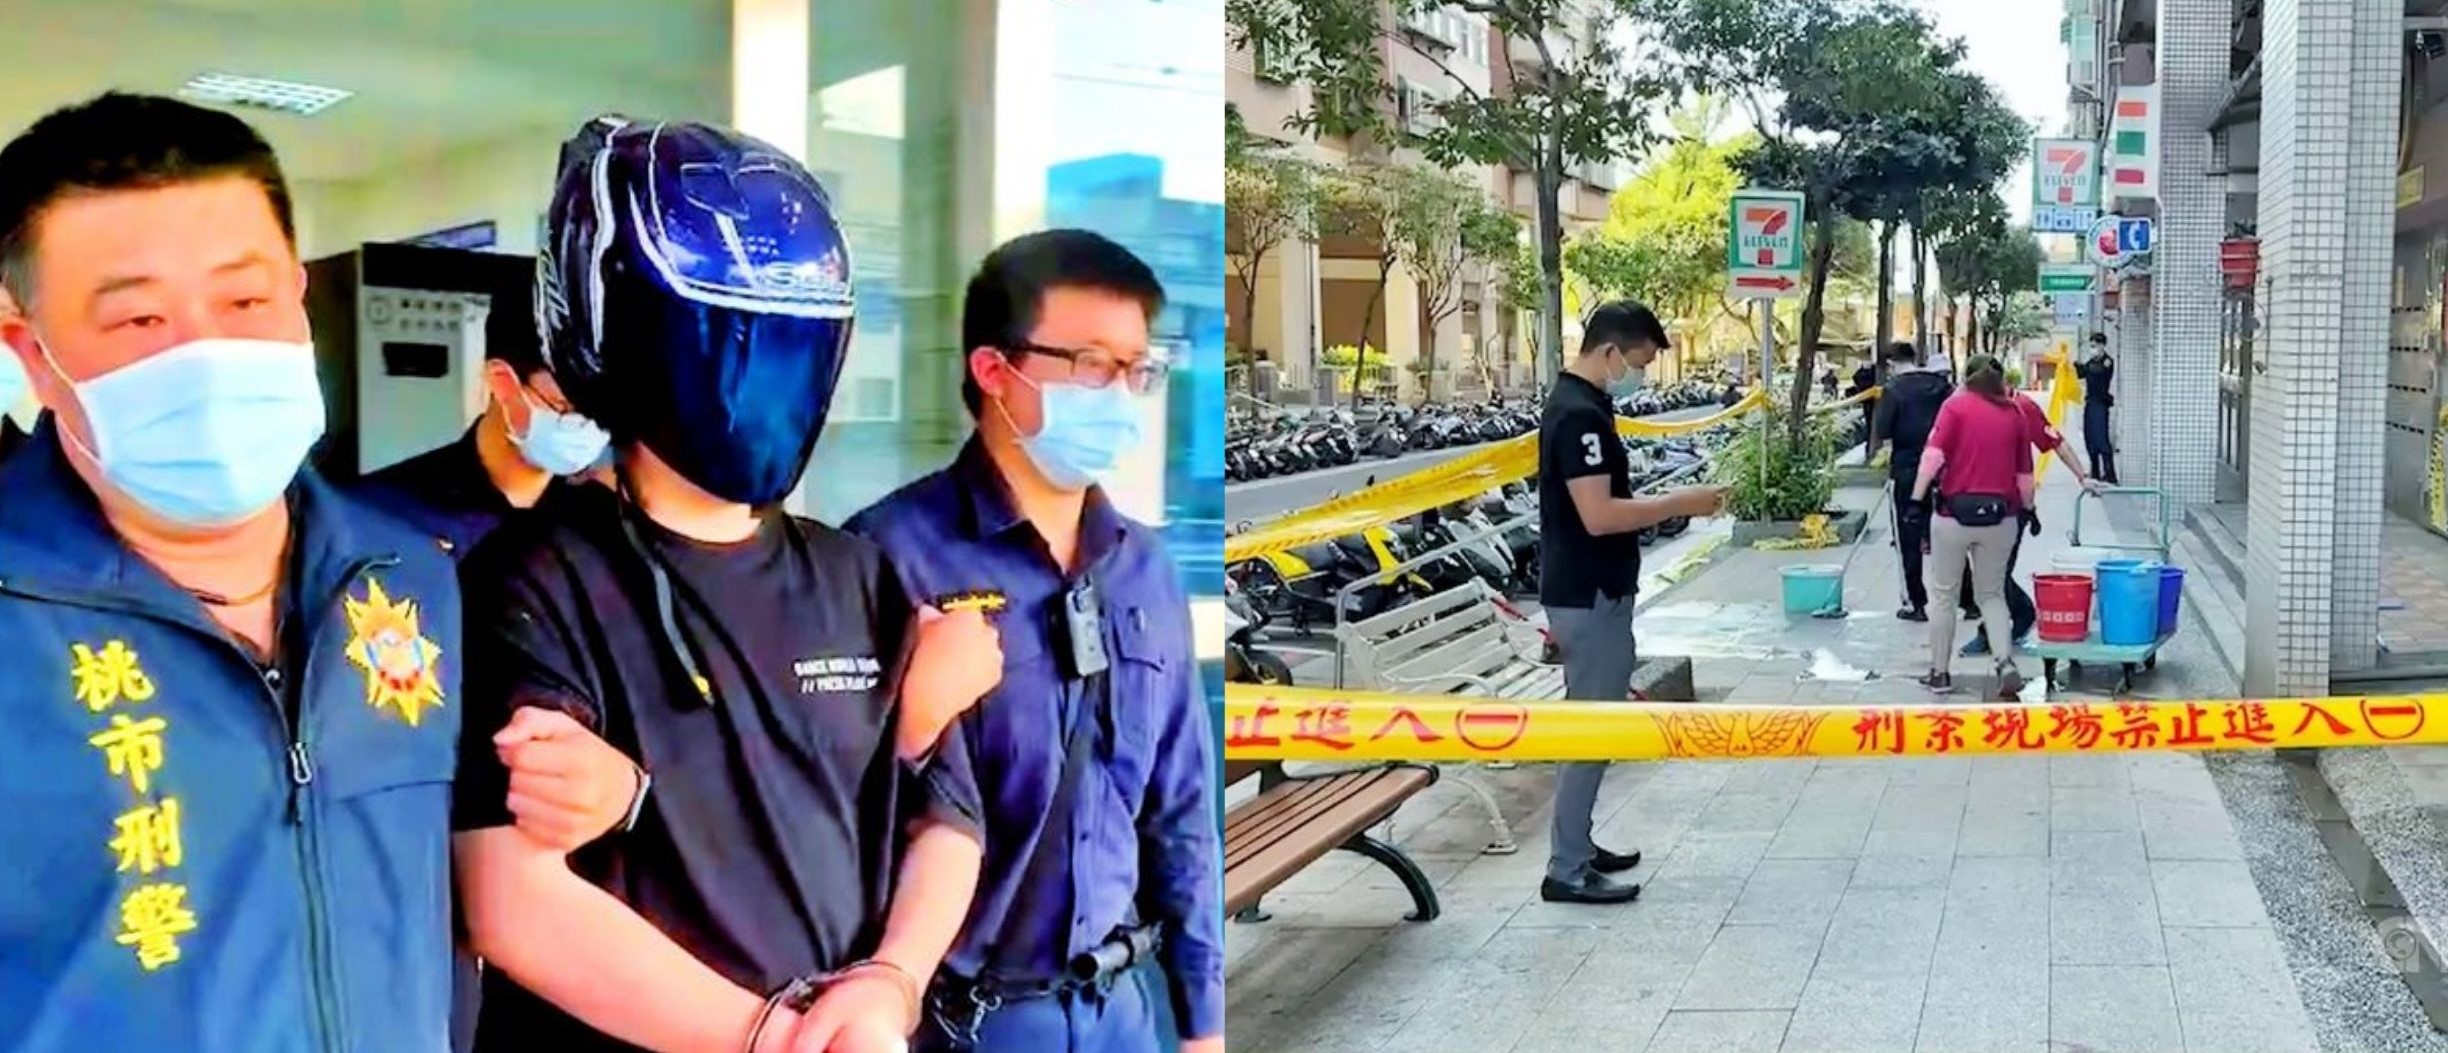 The Taiwanese police had arrested the assailant and increased patrols near convenience stores.